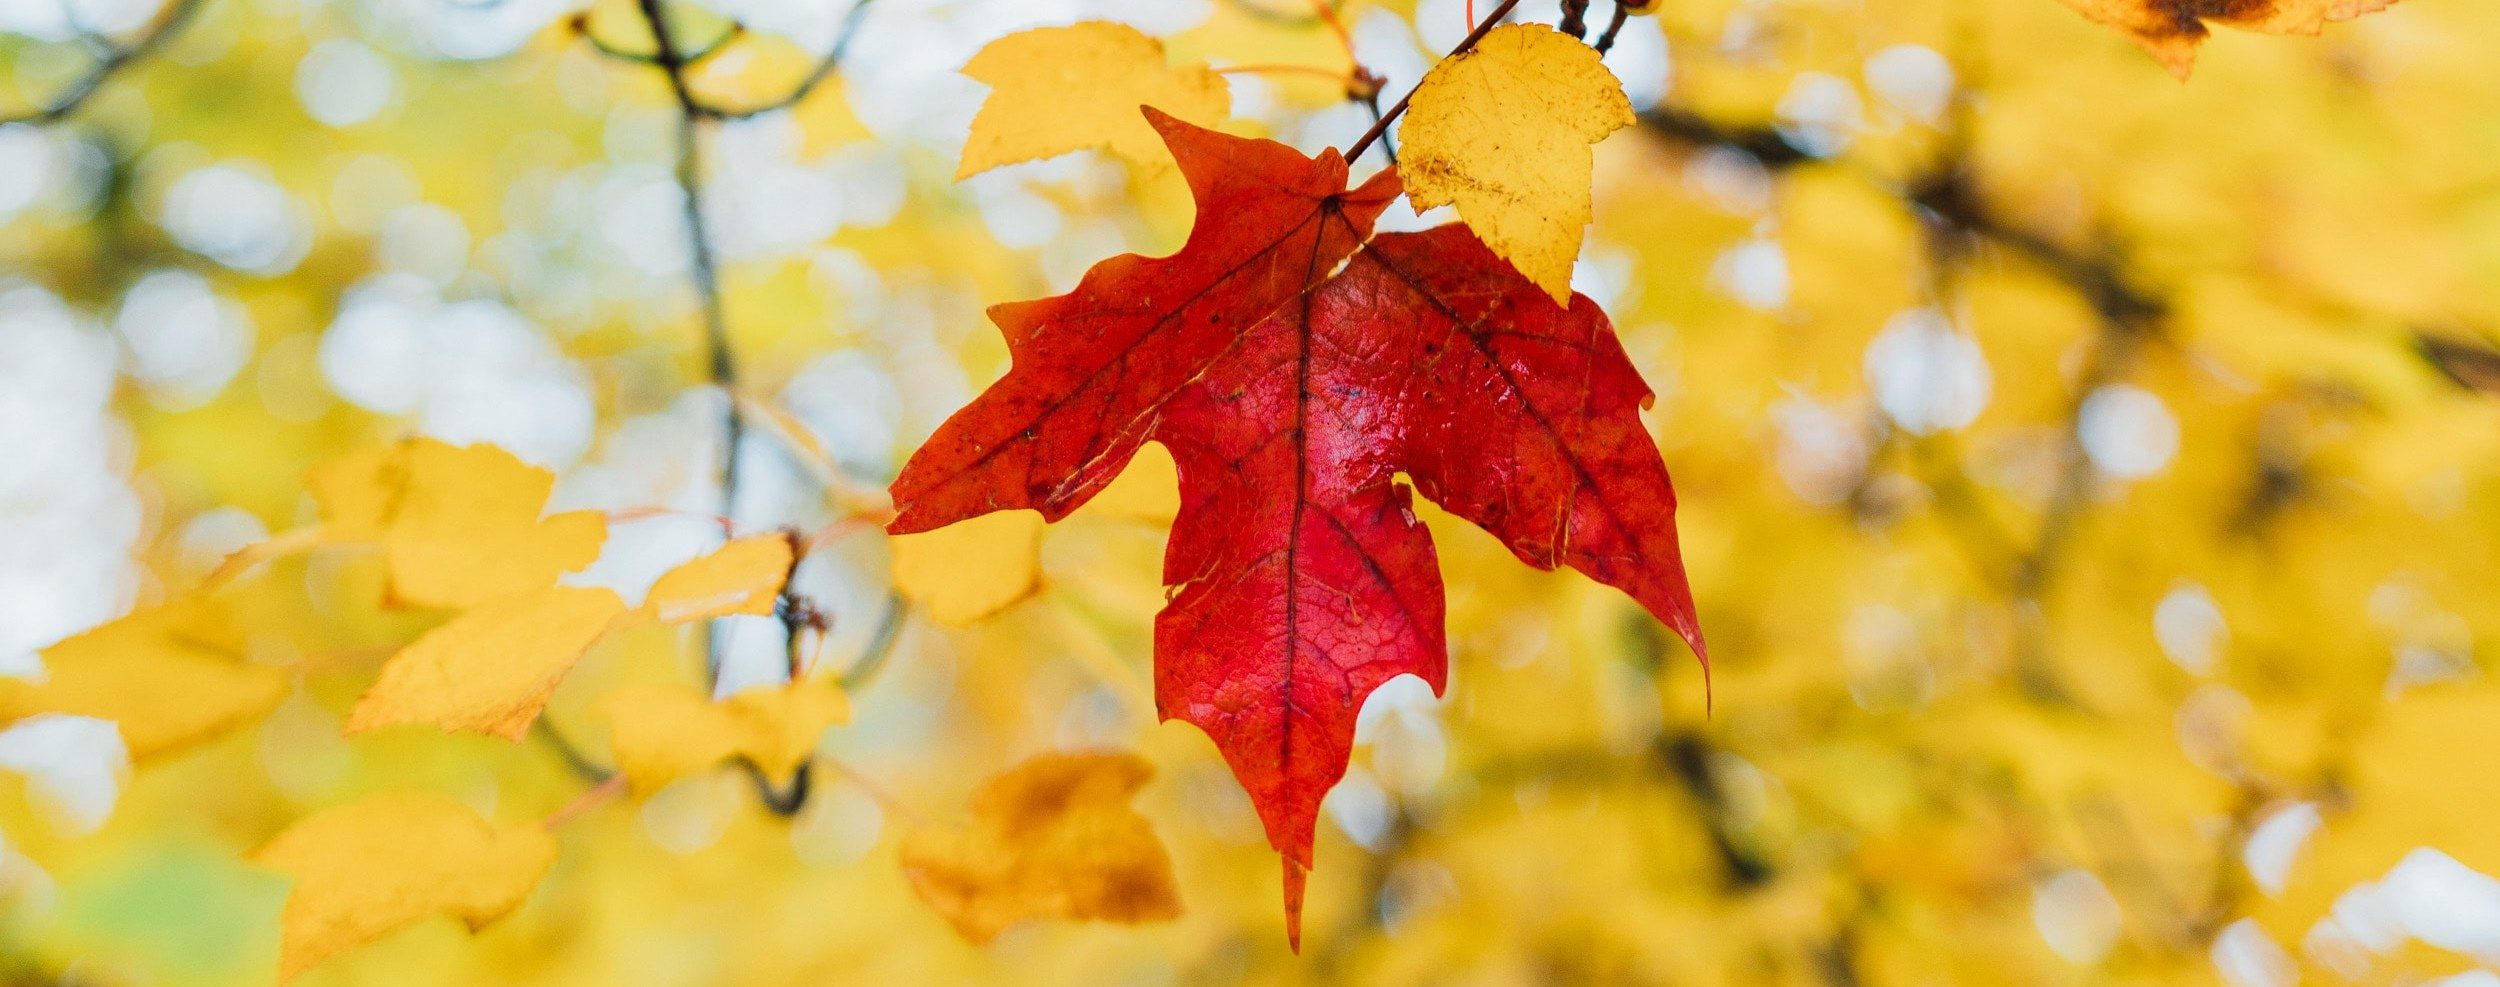 a red leaf among yellow leaves